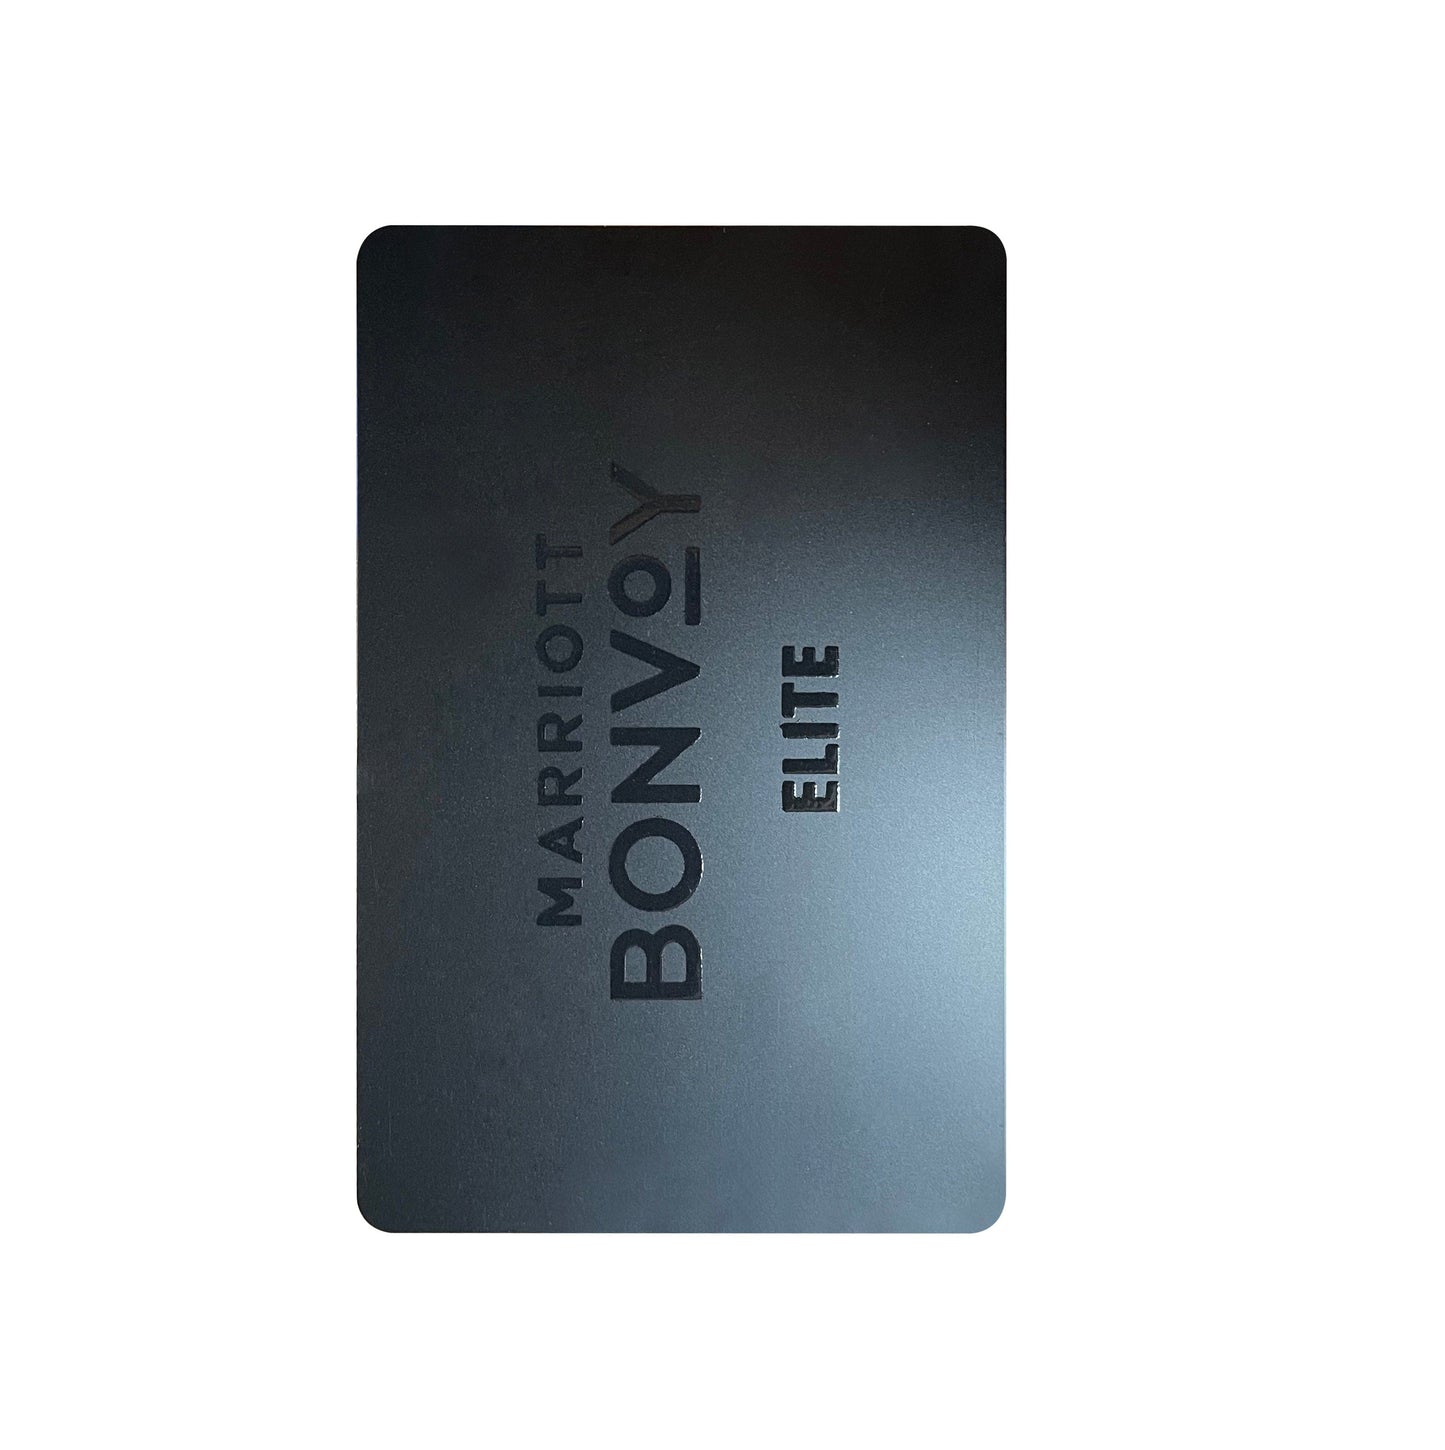 Marriott Bonvoy ULEV1 48 byte RFID Key Cards Compatible with Assa Abloy* Guest Lock Systems-See Description (Sold in boxes of 200)